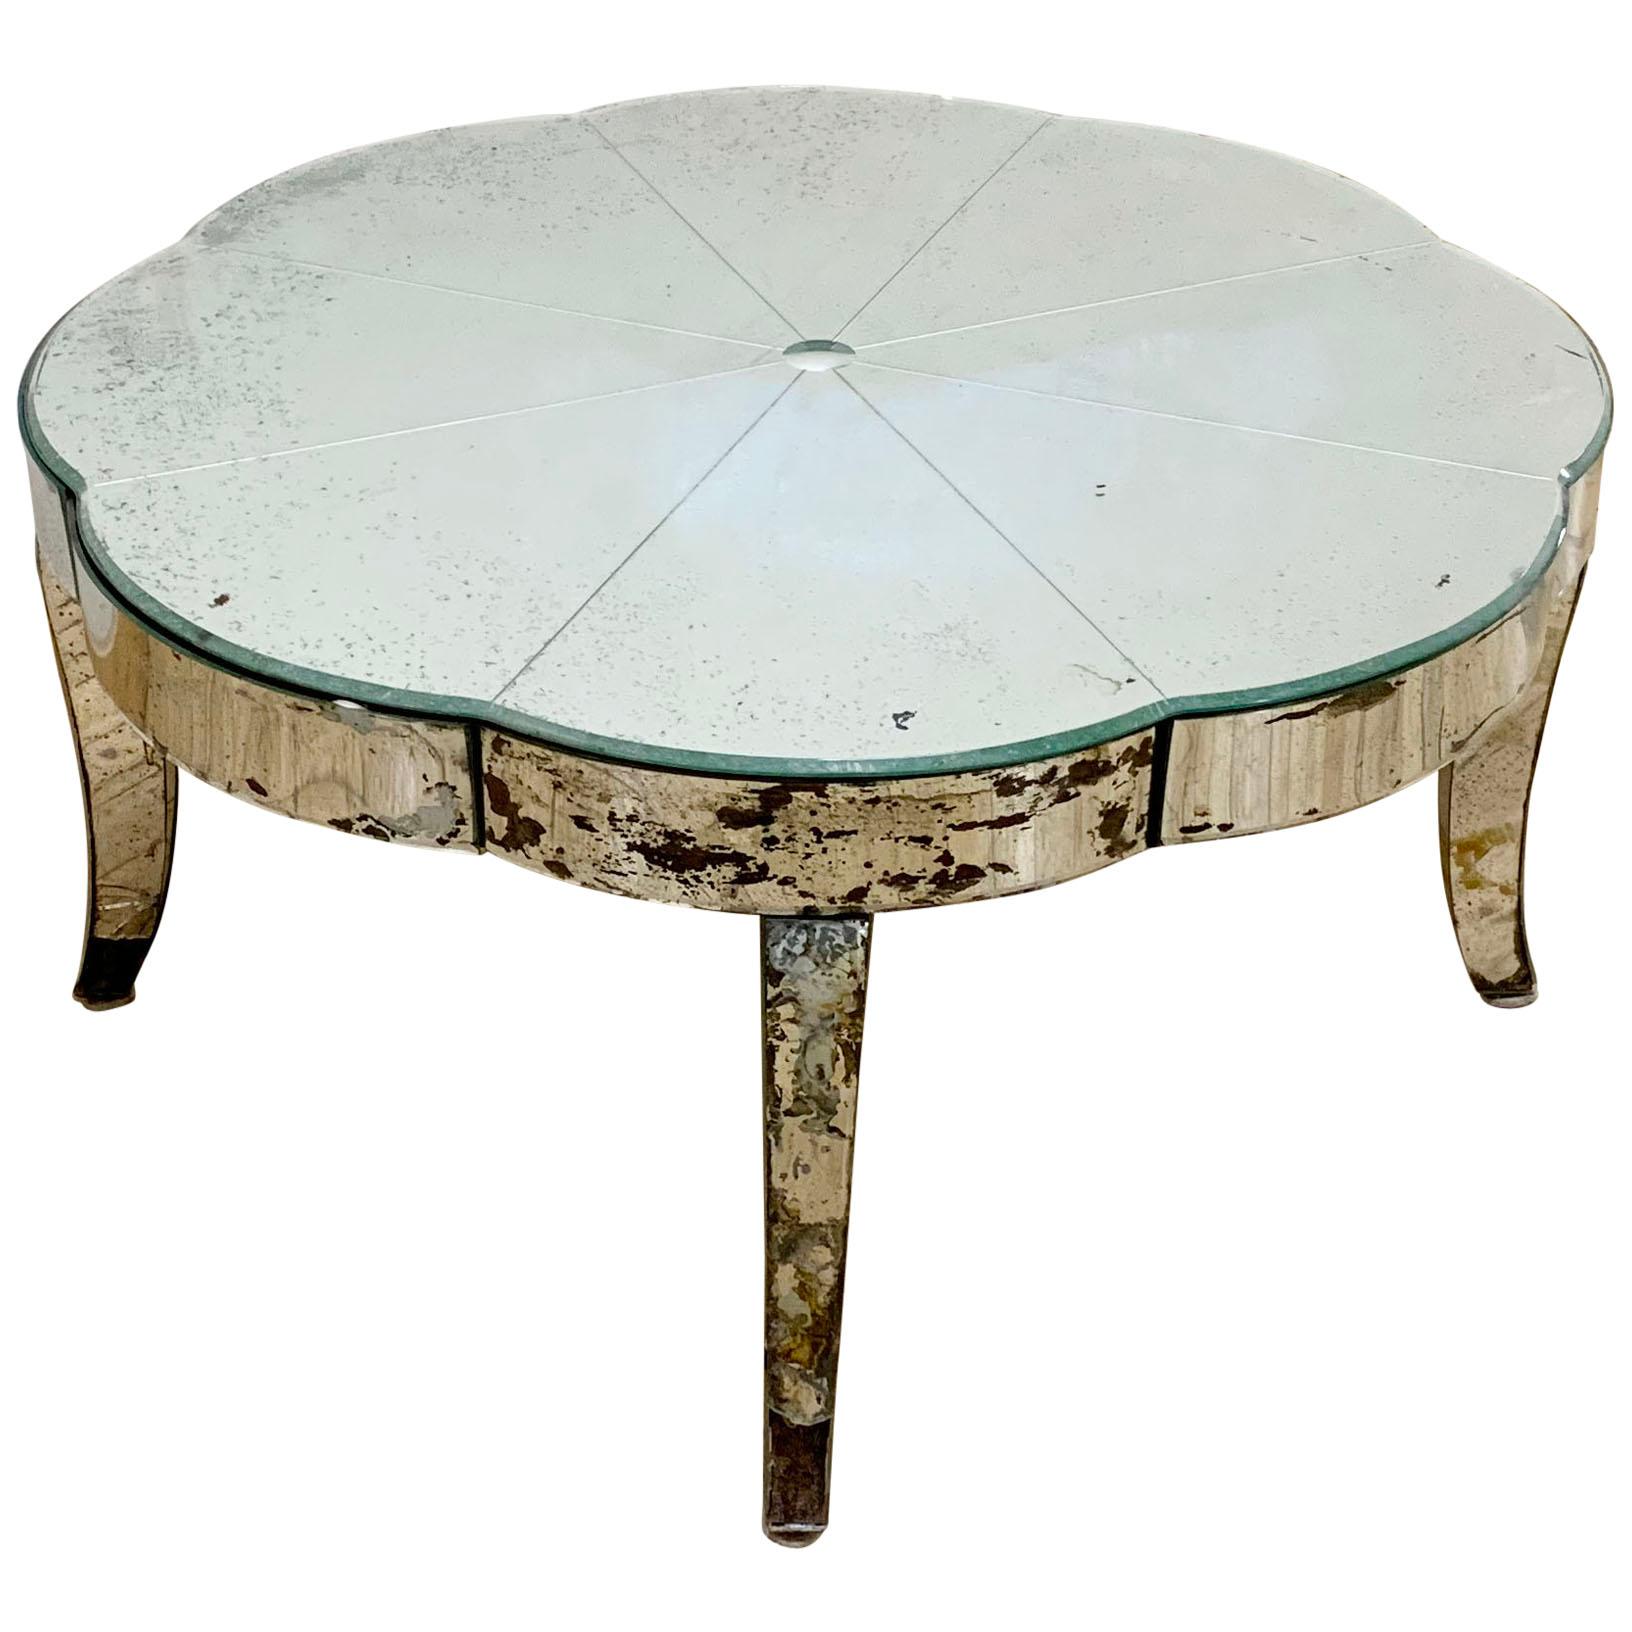 Period French or Italian Deco Mirrored Coffee Table For Sale